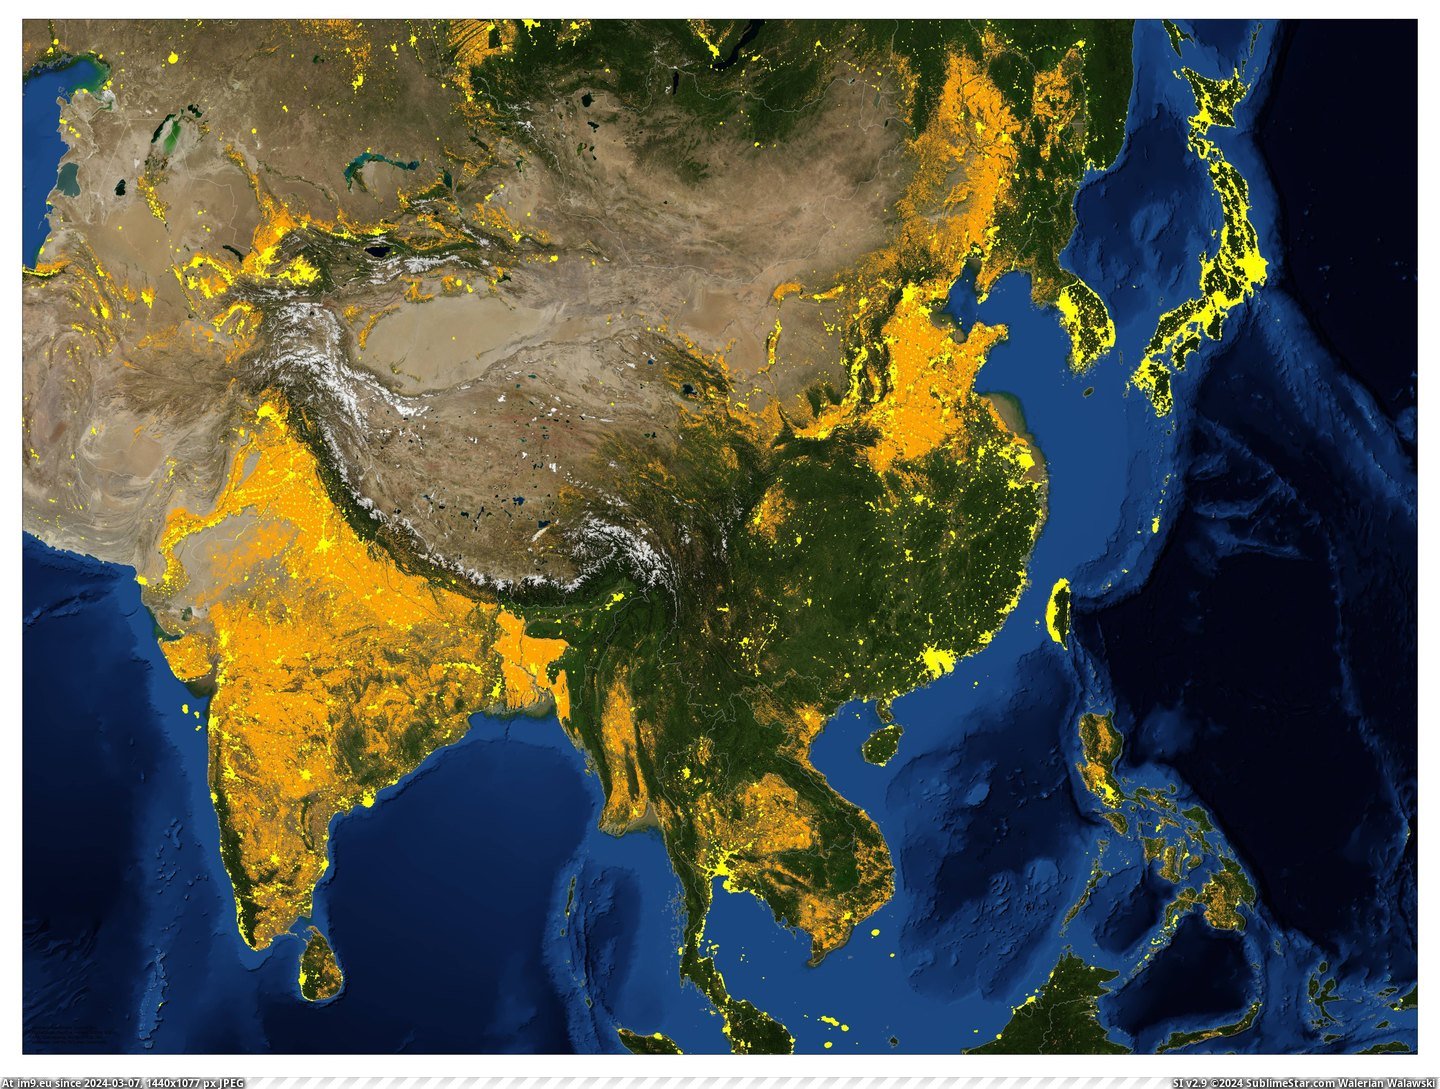 #See #Human #Areas #Cropland #Settled #East #Asia [Mapporn] East Asia - Human Settled Areas (see comments) and Cropland [5000x3750][OC] Pic. (Image of album My r/MAPS favs))